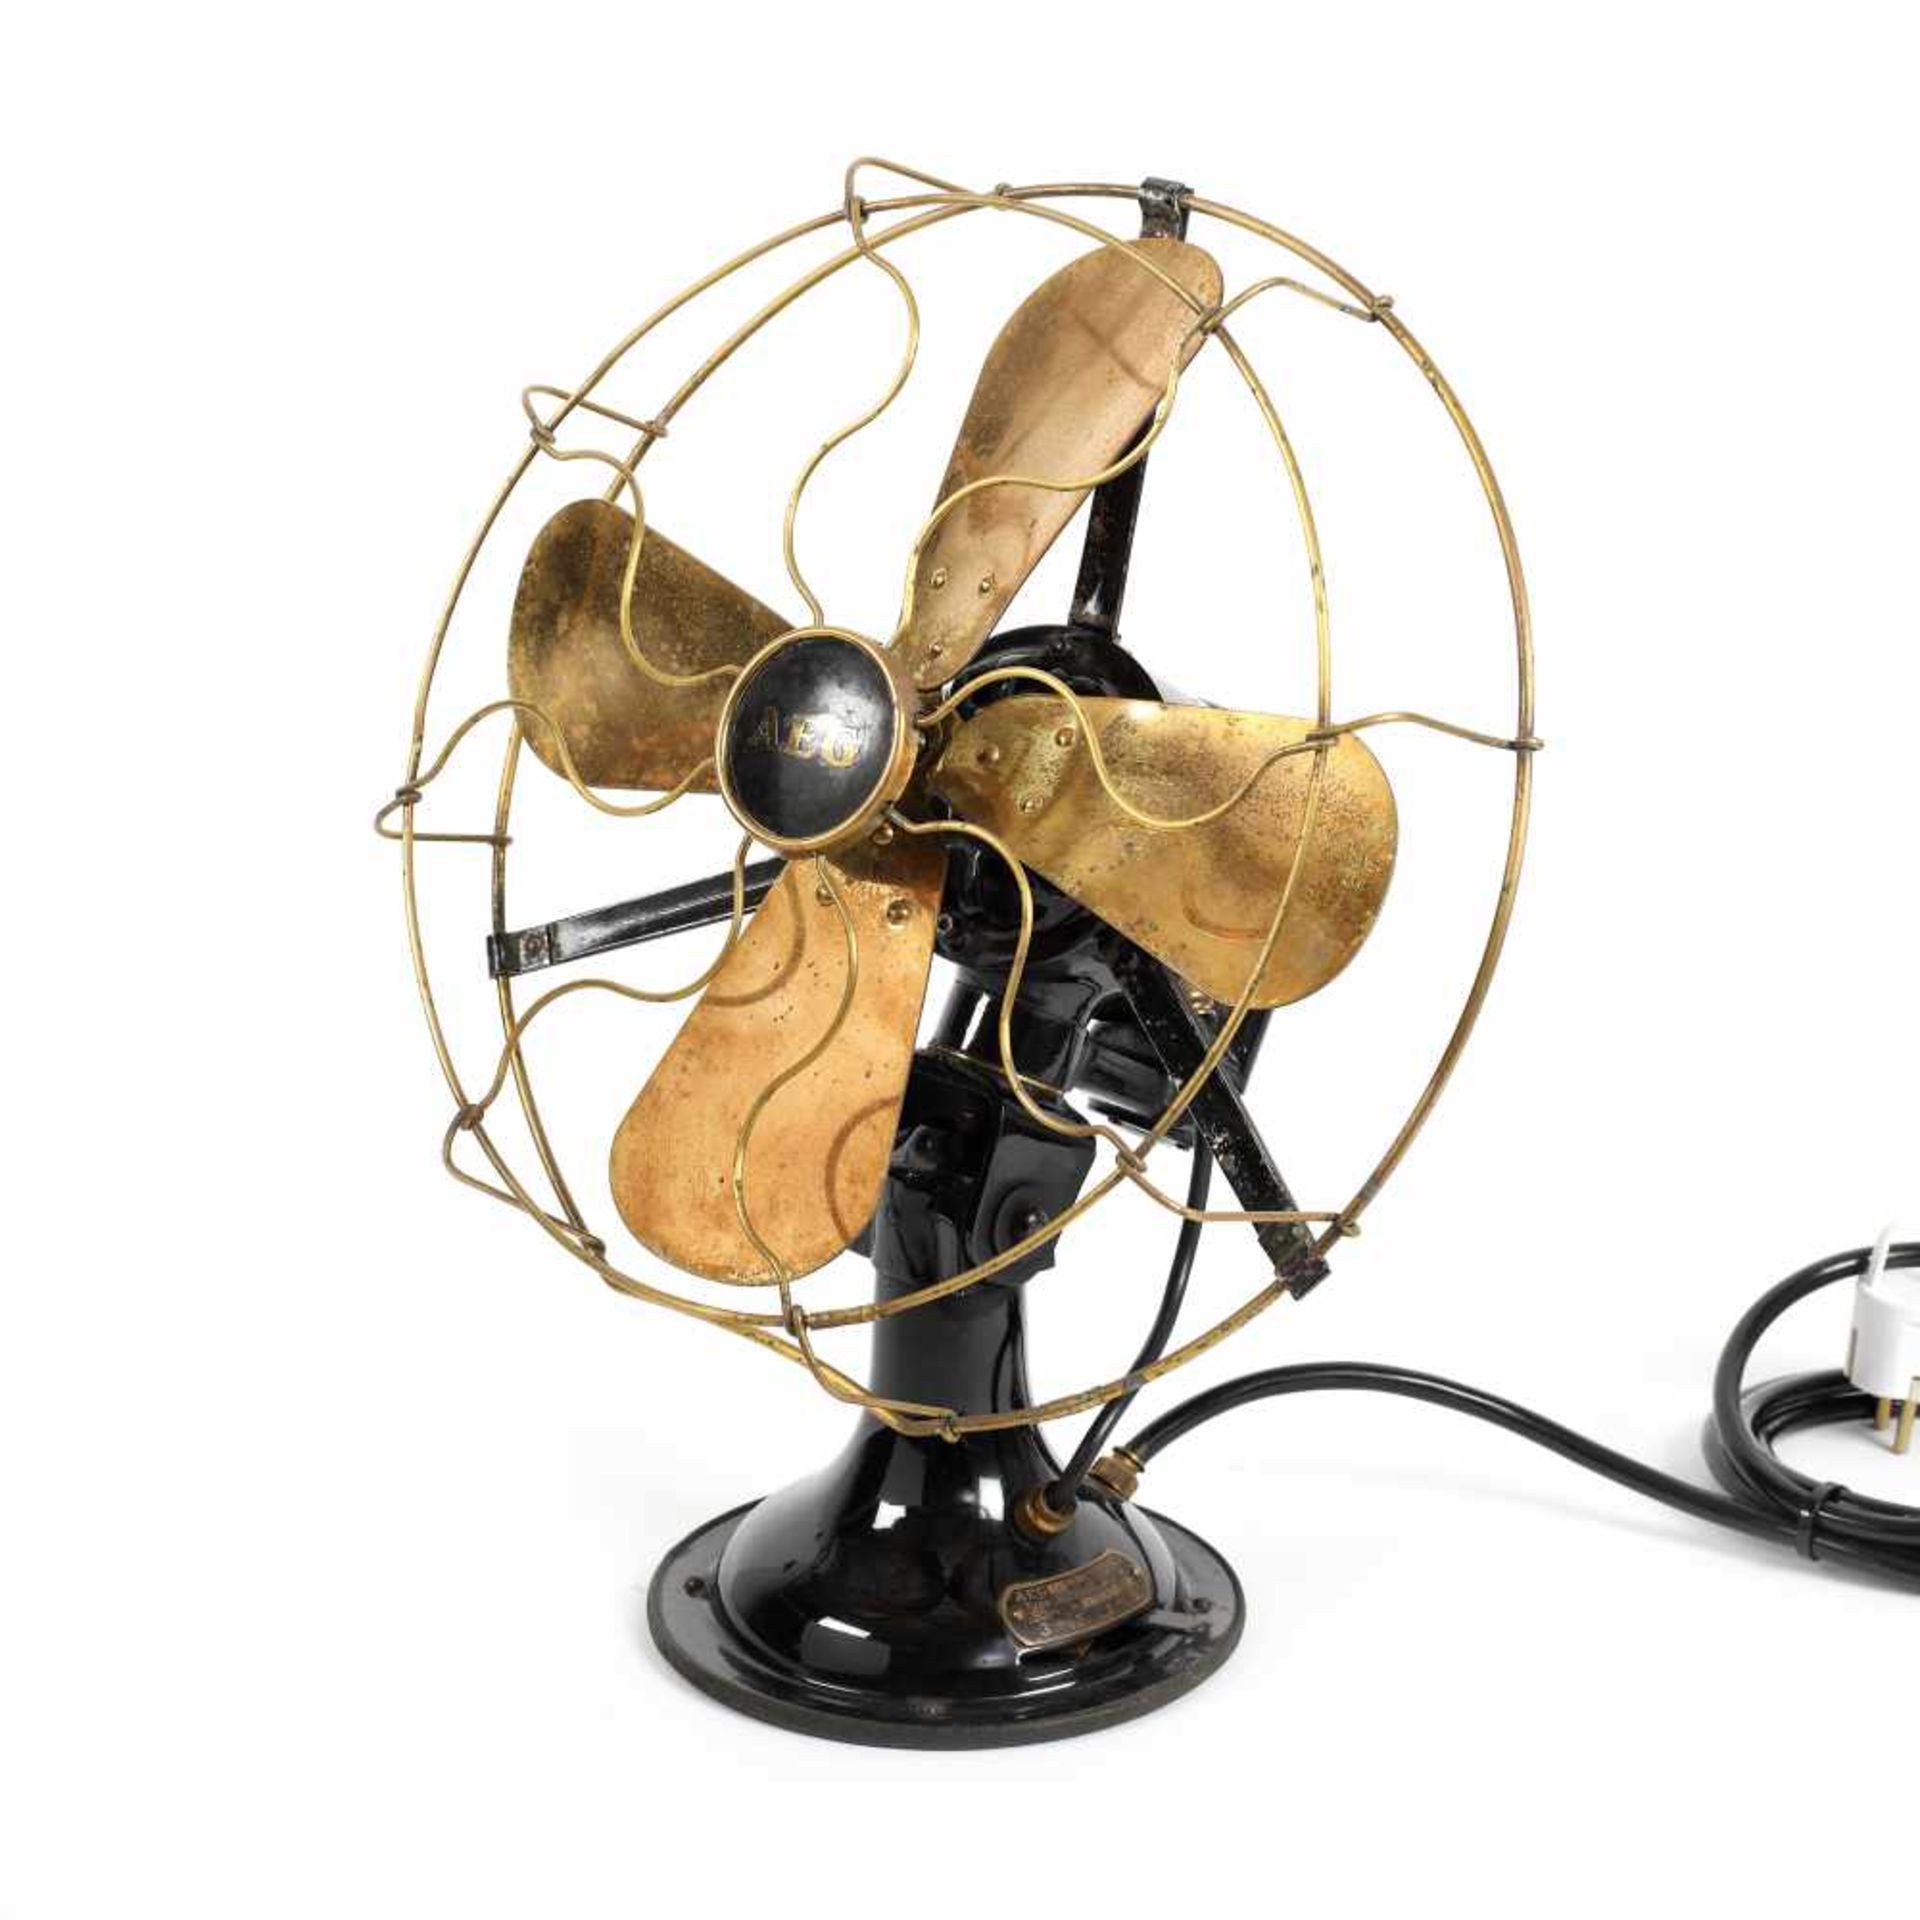 Vintage AEG fan in Art Deco style, designed by Peter Behrens, early 20th century